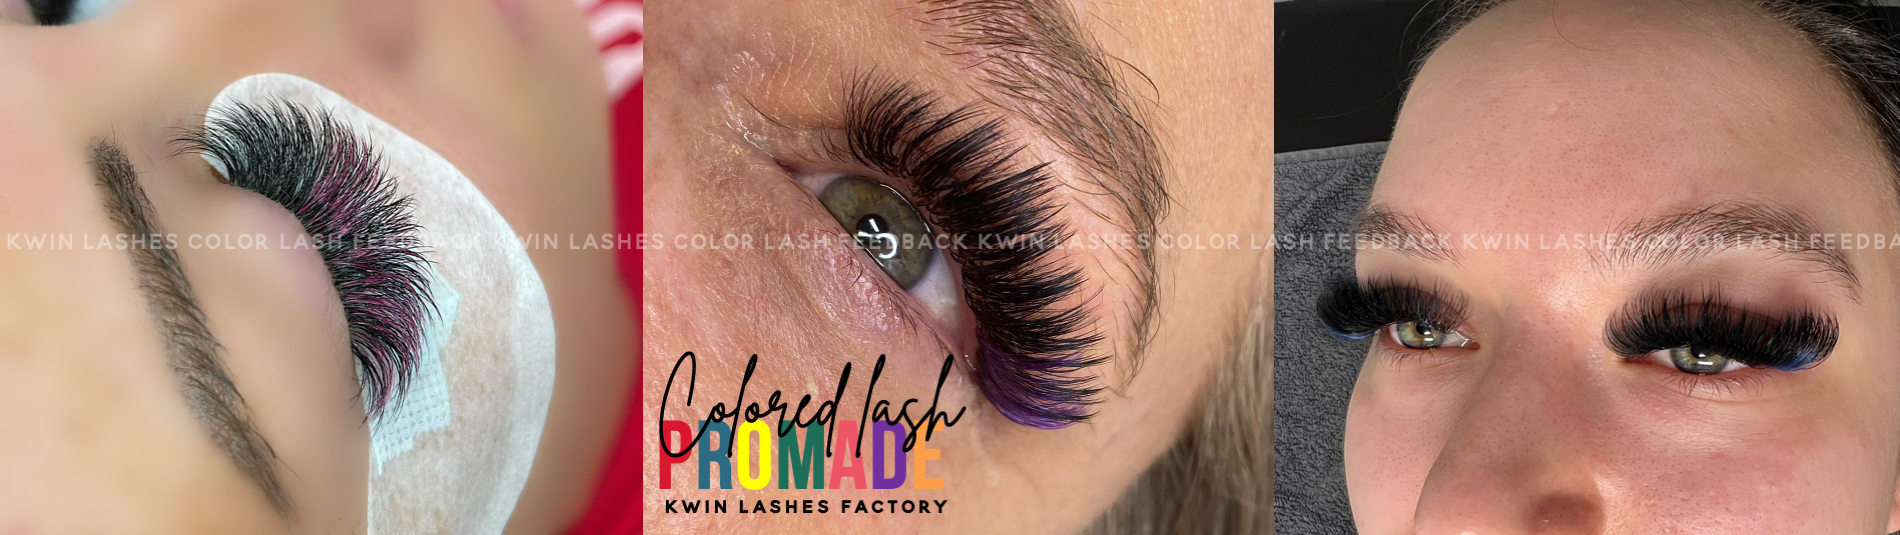 Eyelash extensions with colored lash